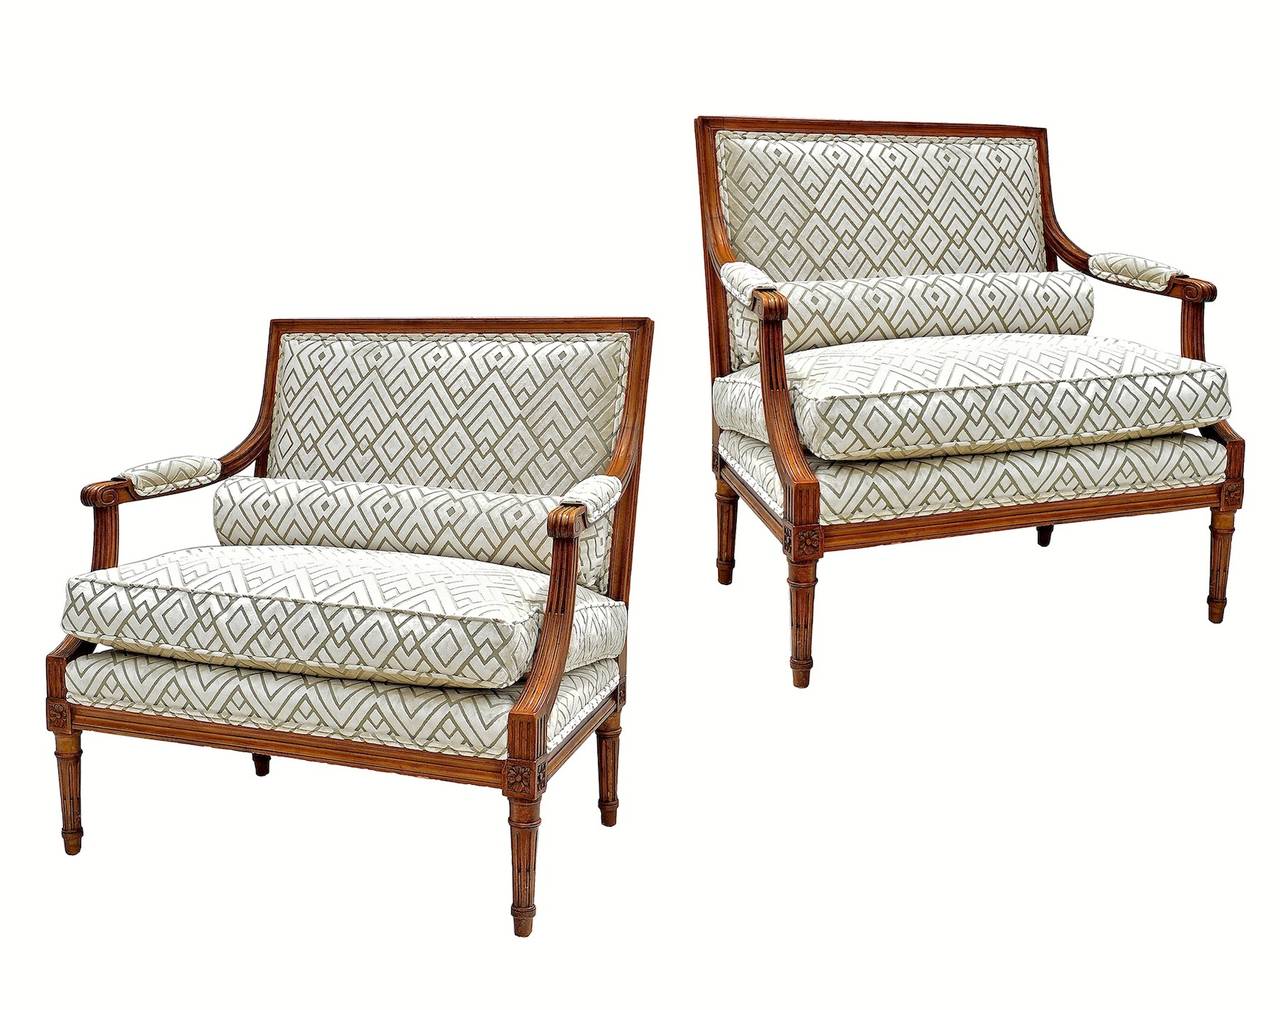 Pair of Italian made Marquise chairs in the Louis XVI taste circa 1940. Loose down cushions and round lumbar bolster pillows supply ample comfort to these stylish and striking petite settees. Fruitwood frames are very sturdy and show a high polish